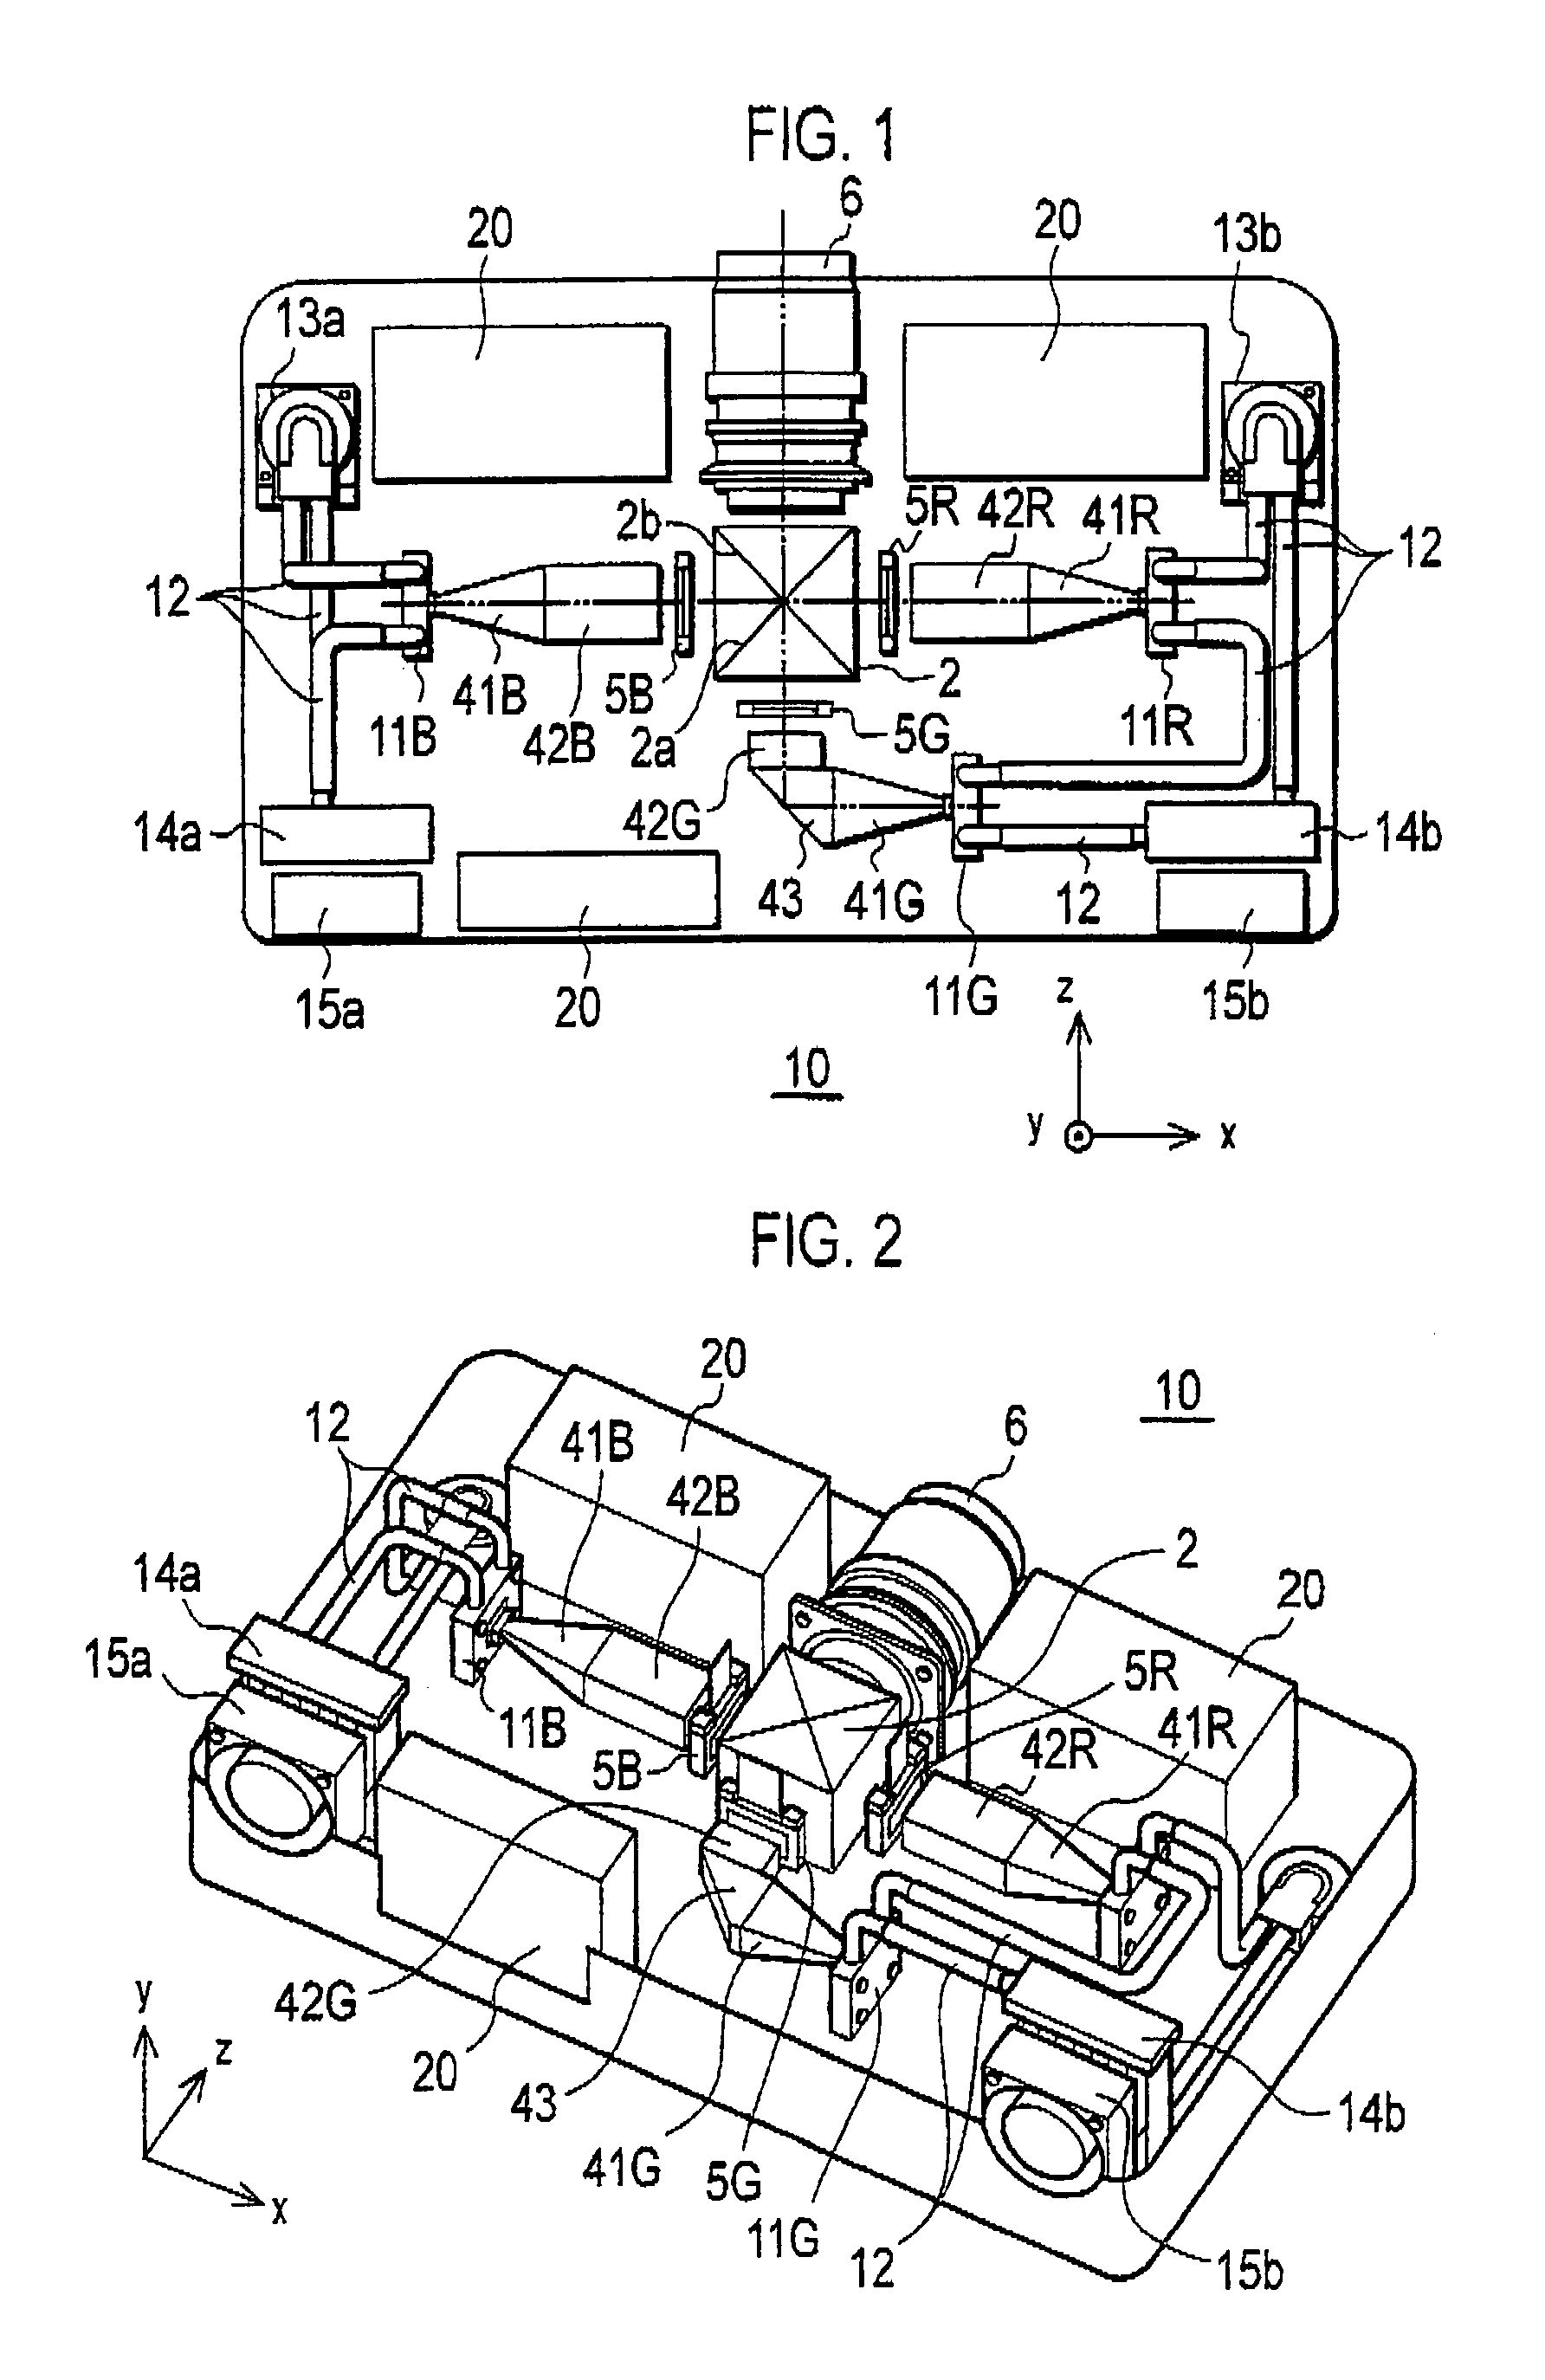 Projection-type image display device